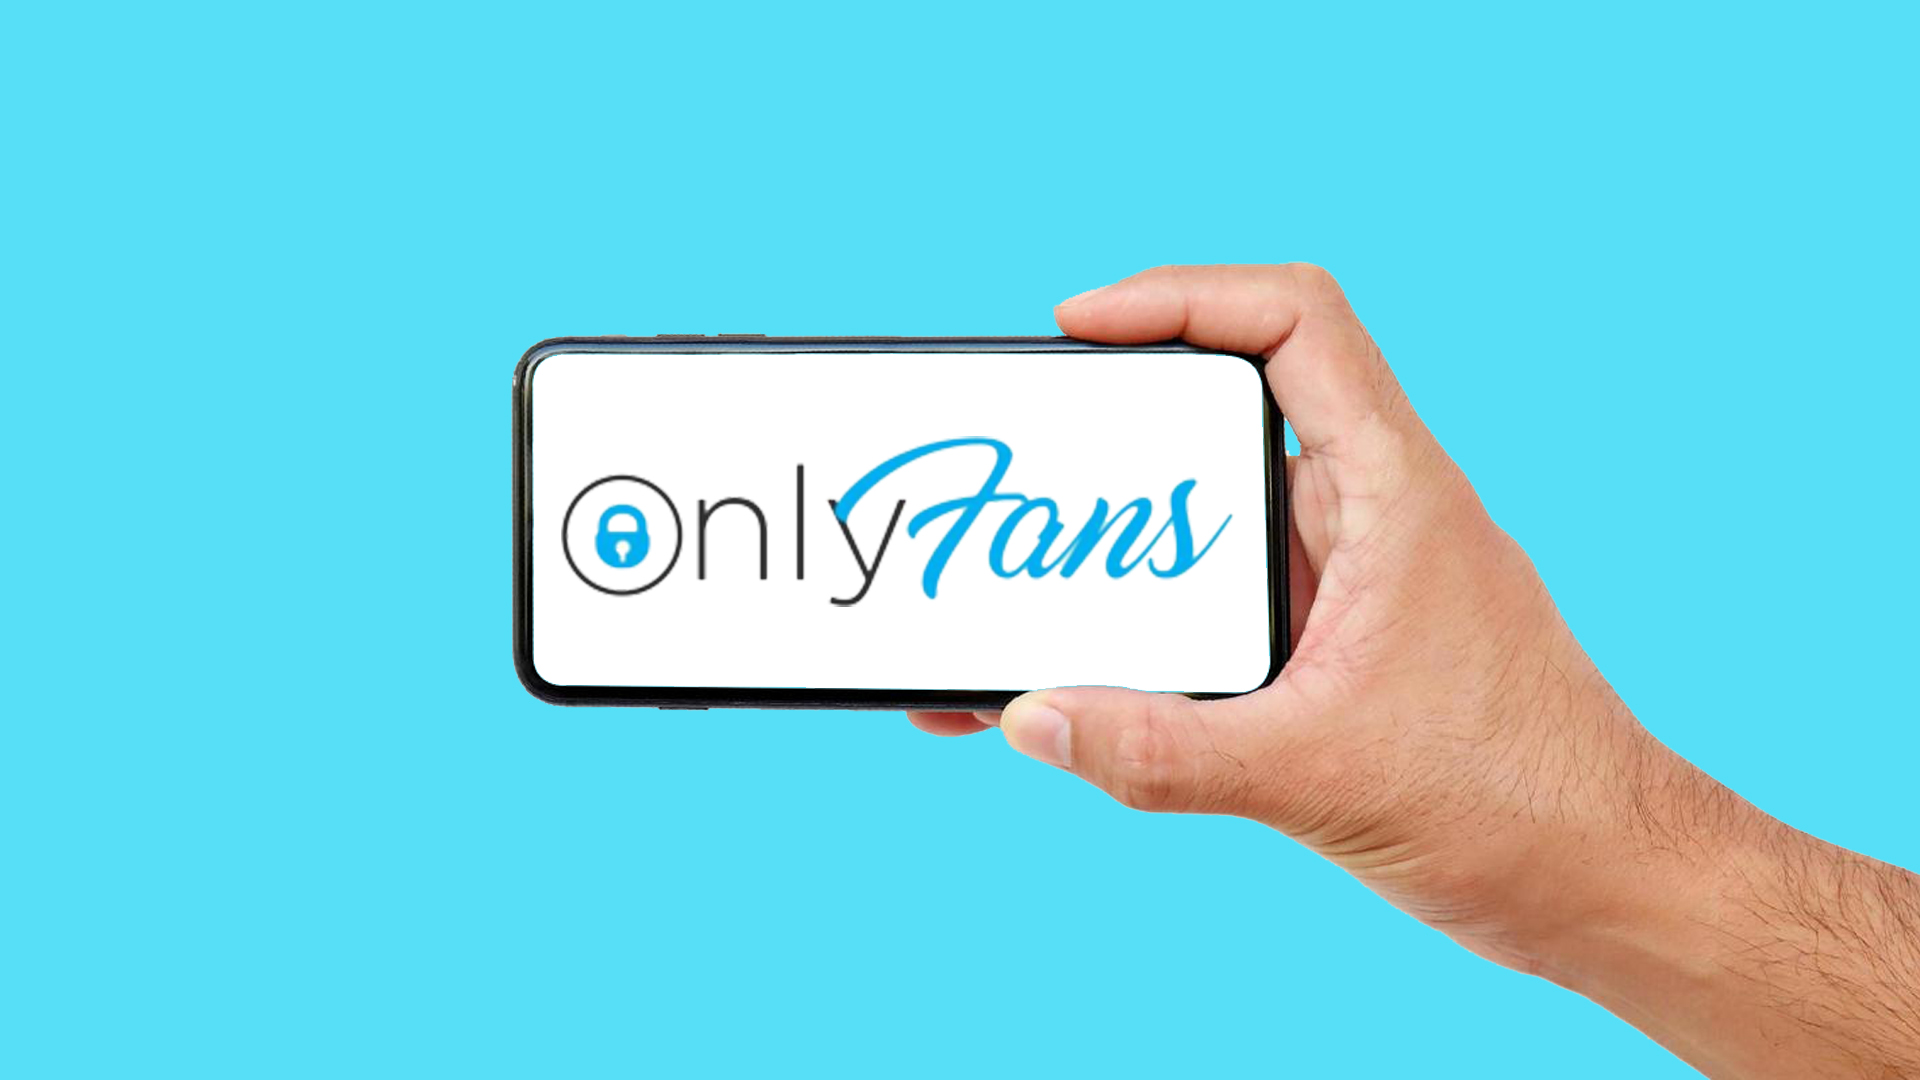 How To Be Successful On Onlyfans